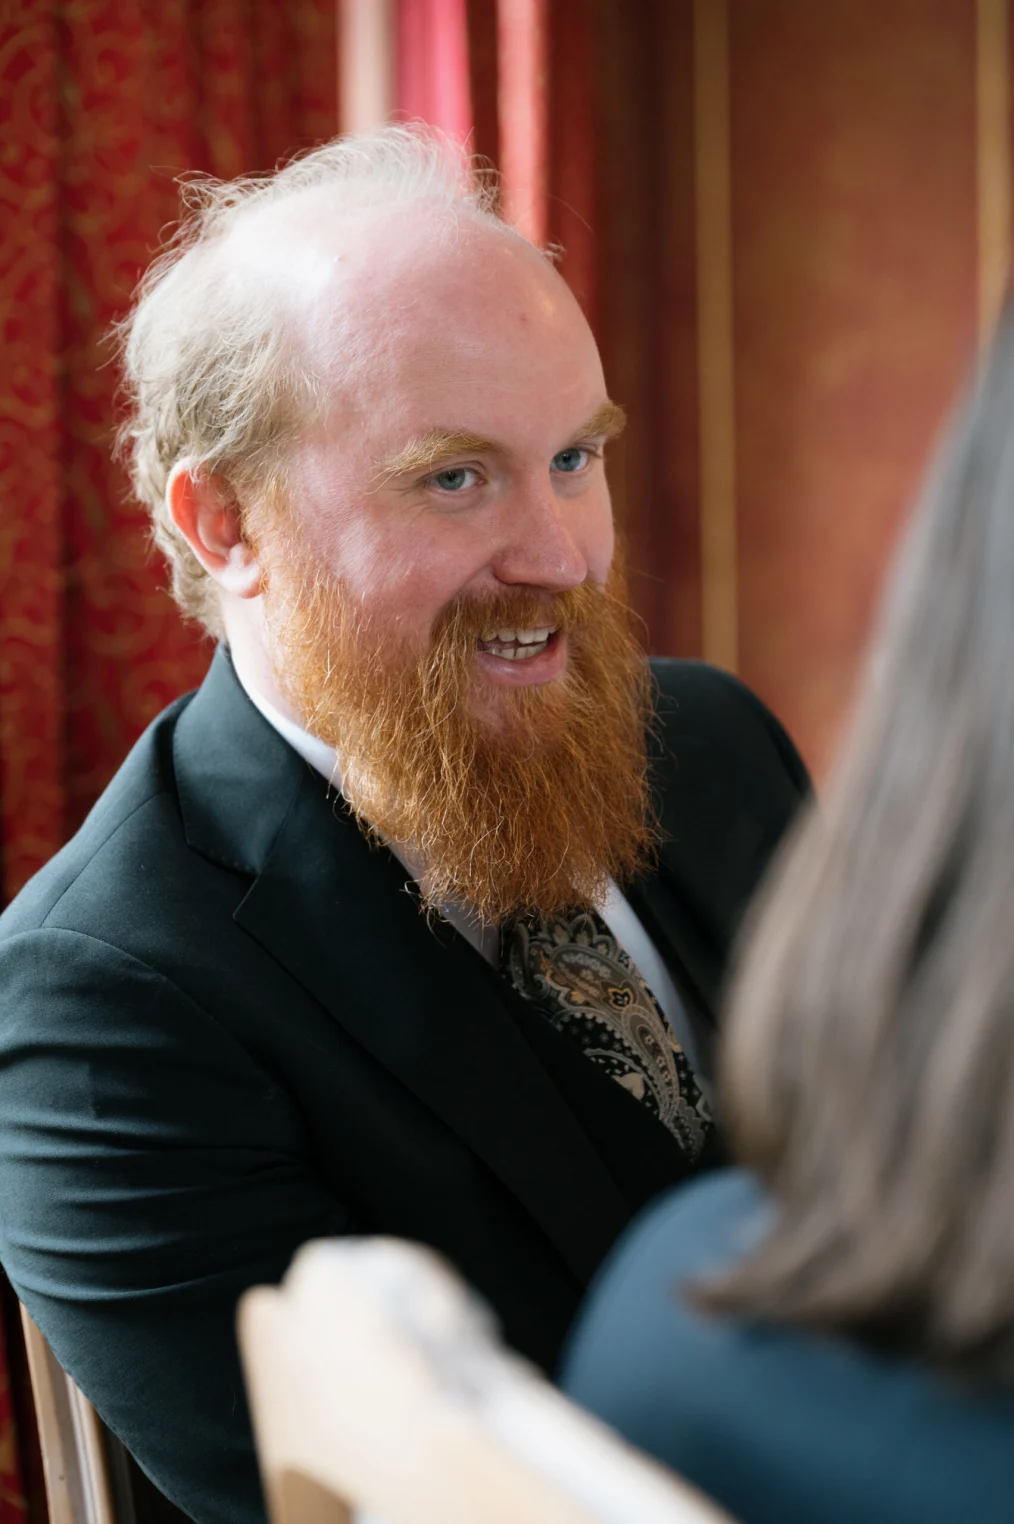 Bjorn Ihler, a man with a light skin tone and thin red hair, smiles as he speaks with someone whose back is to the camera. He has a long red beard and is wearing a black suit. 